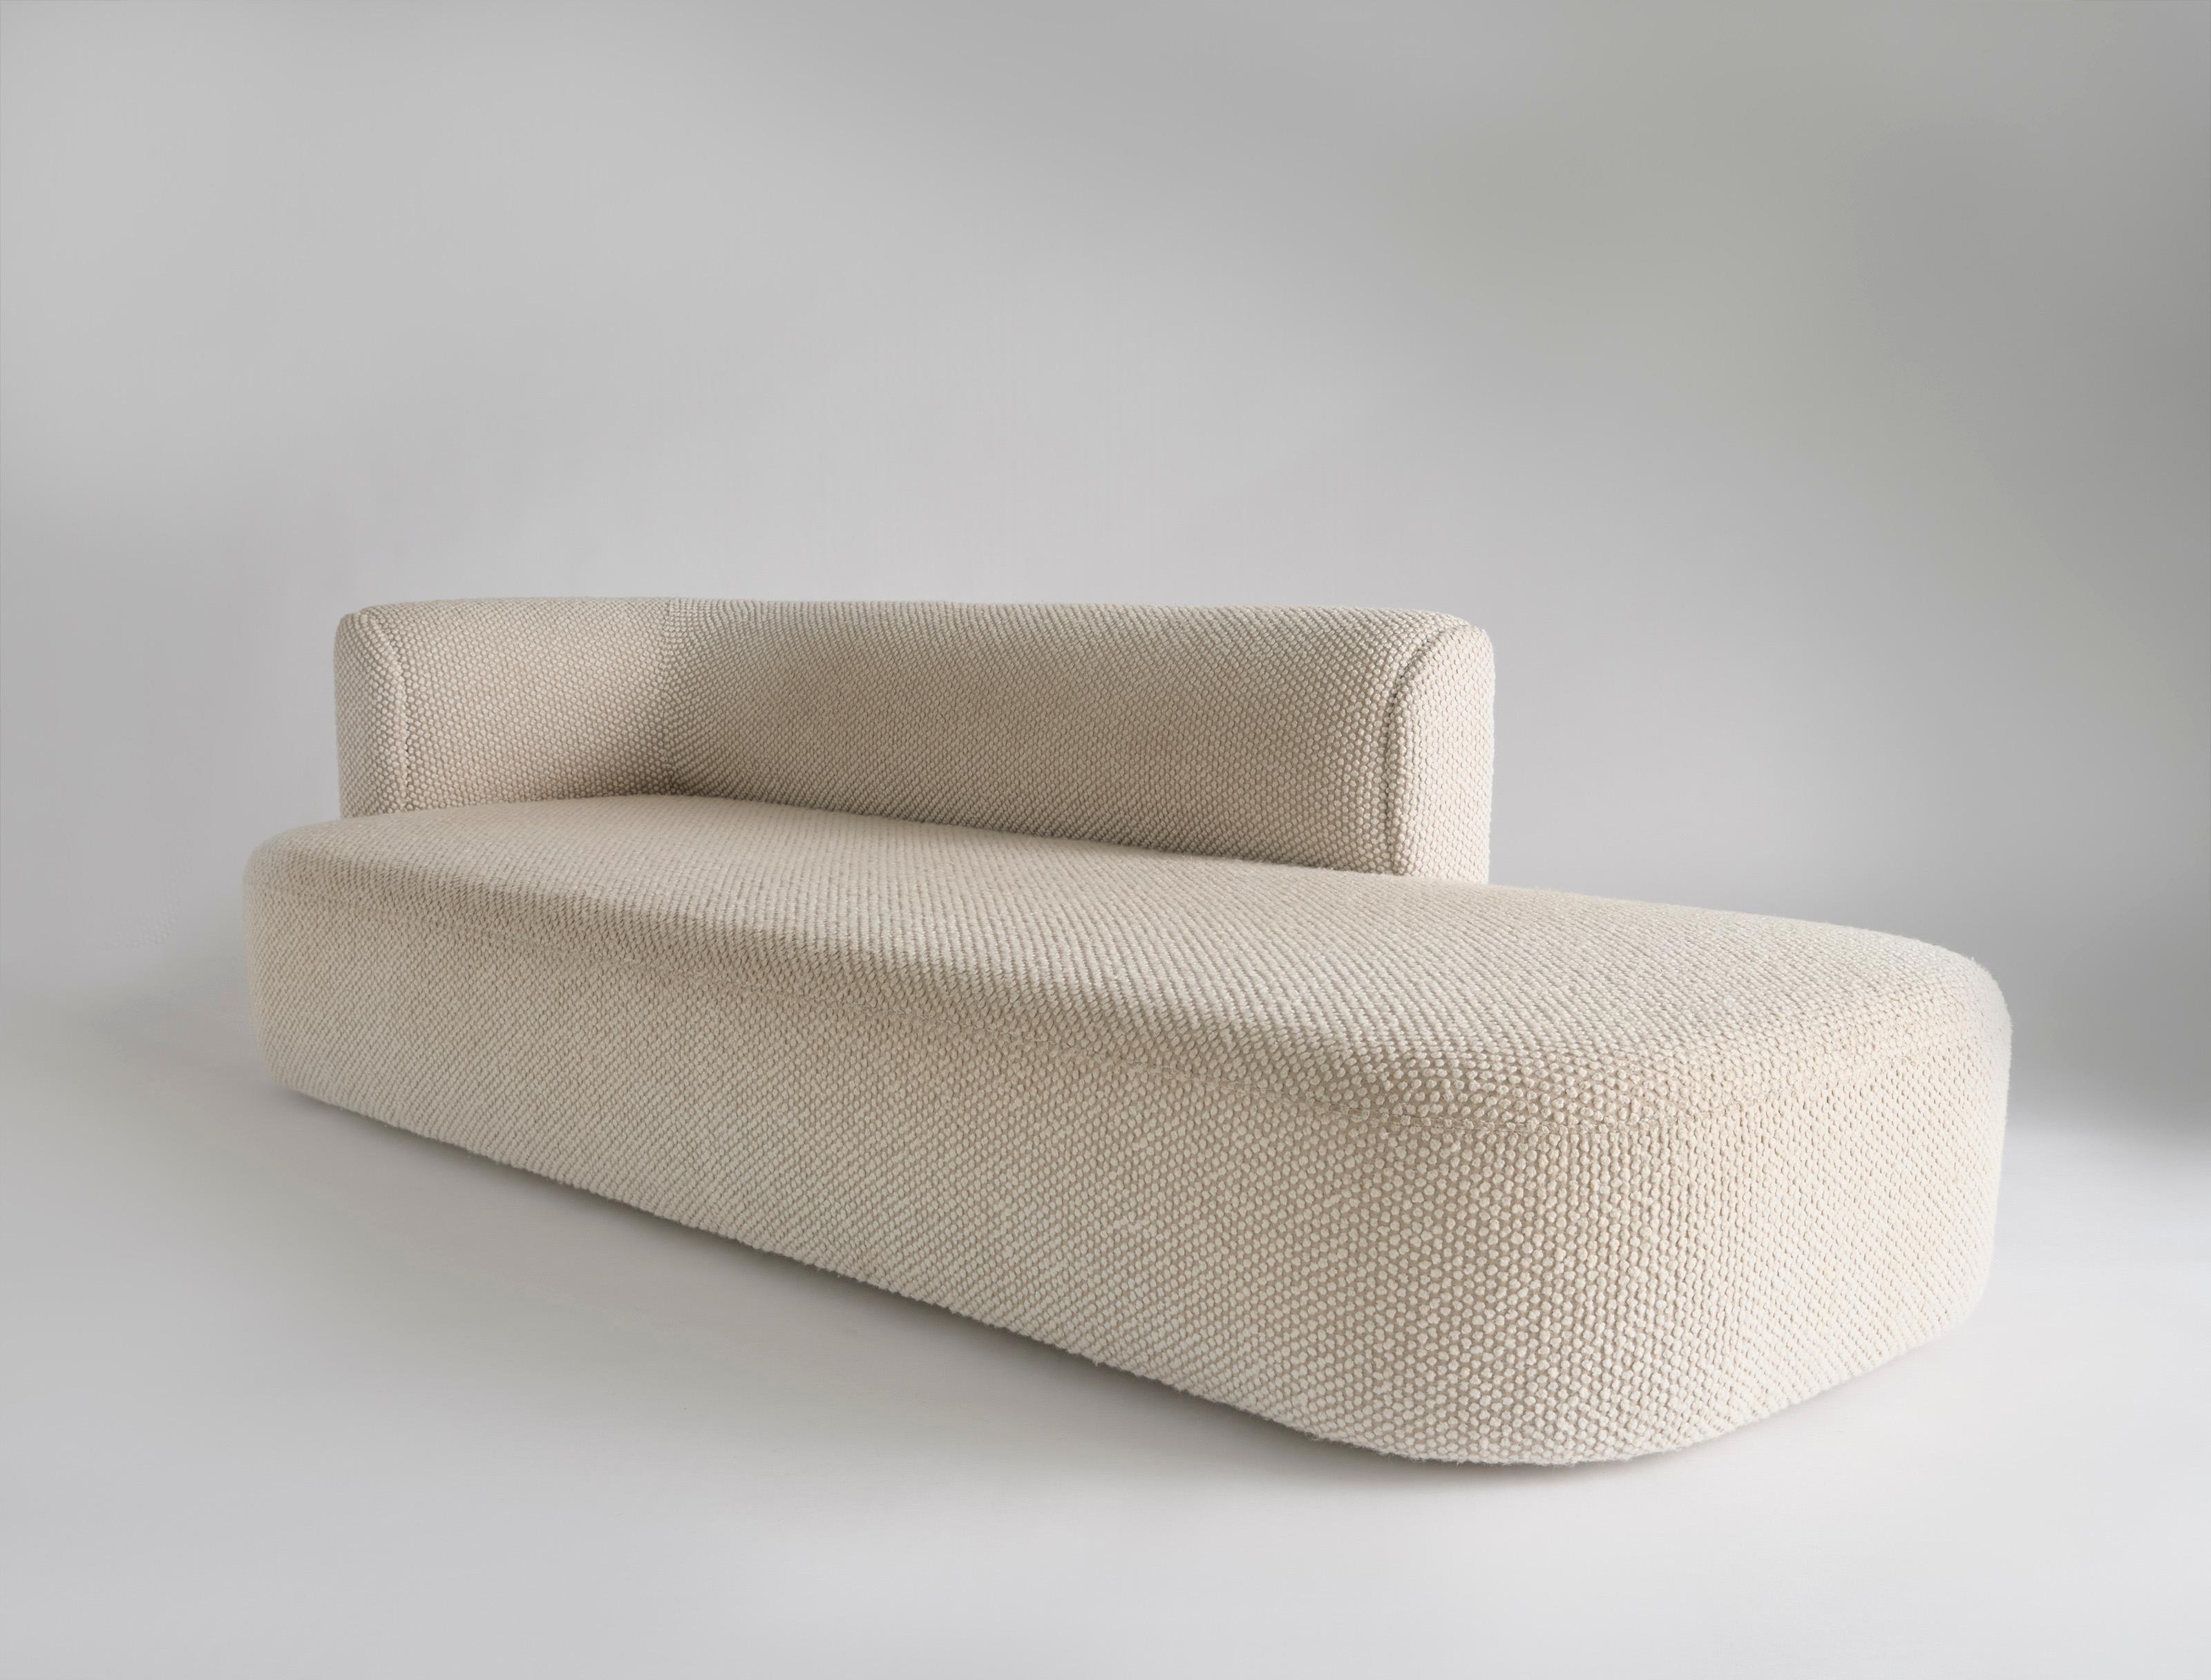 Capper Small Chaise Longue by Phase Design
Dimensions: D 81,3 x W 147,3 x H 61 cm. 
Materials: Upholstery.

Upholstery may be sourced in Customer Own Material (COM), Customer Own Leather (COL), or in Phase Design's suggested fabrics and leathers.